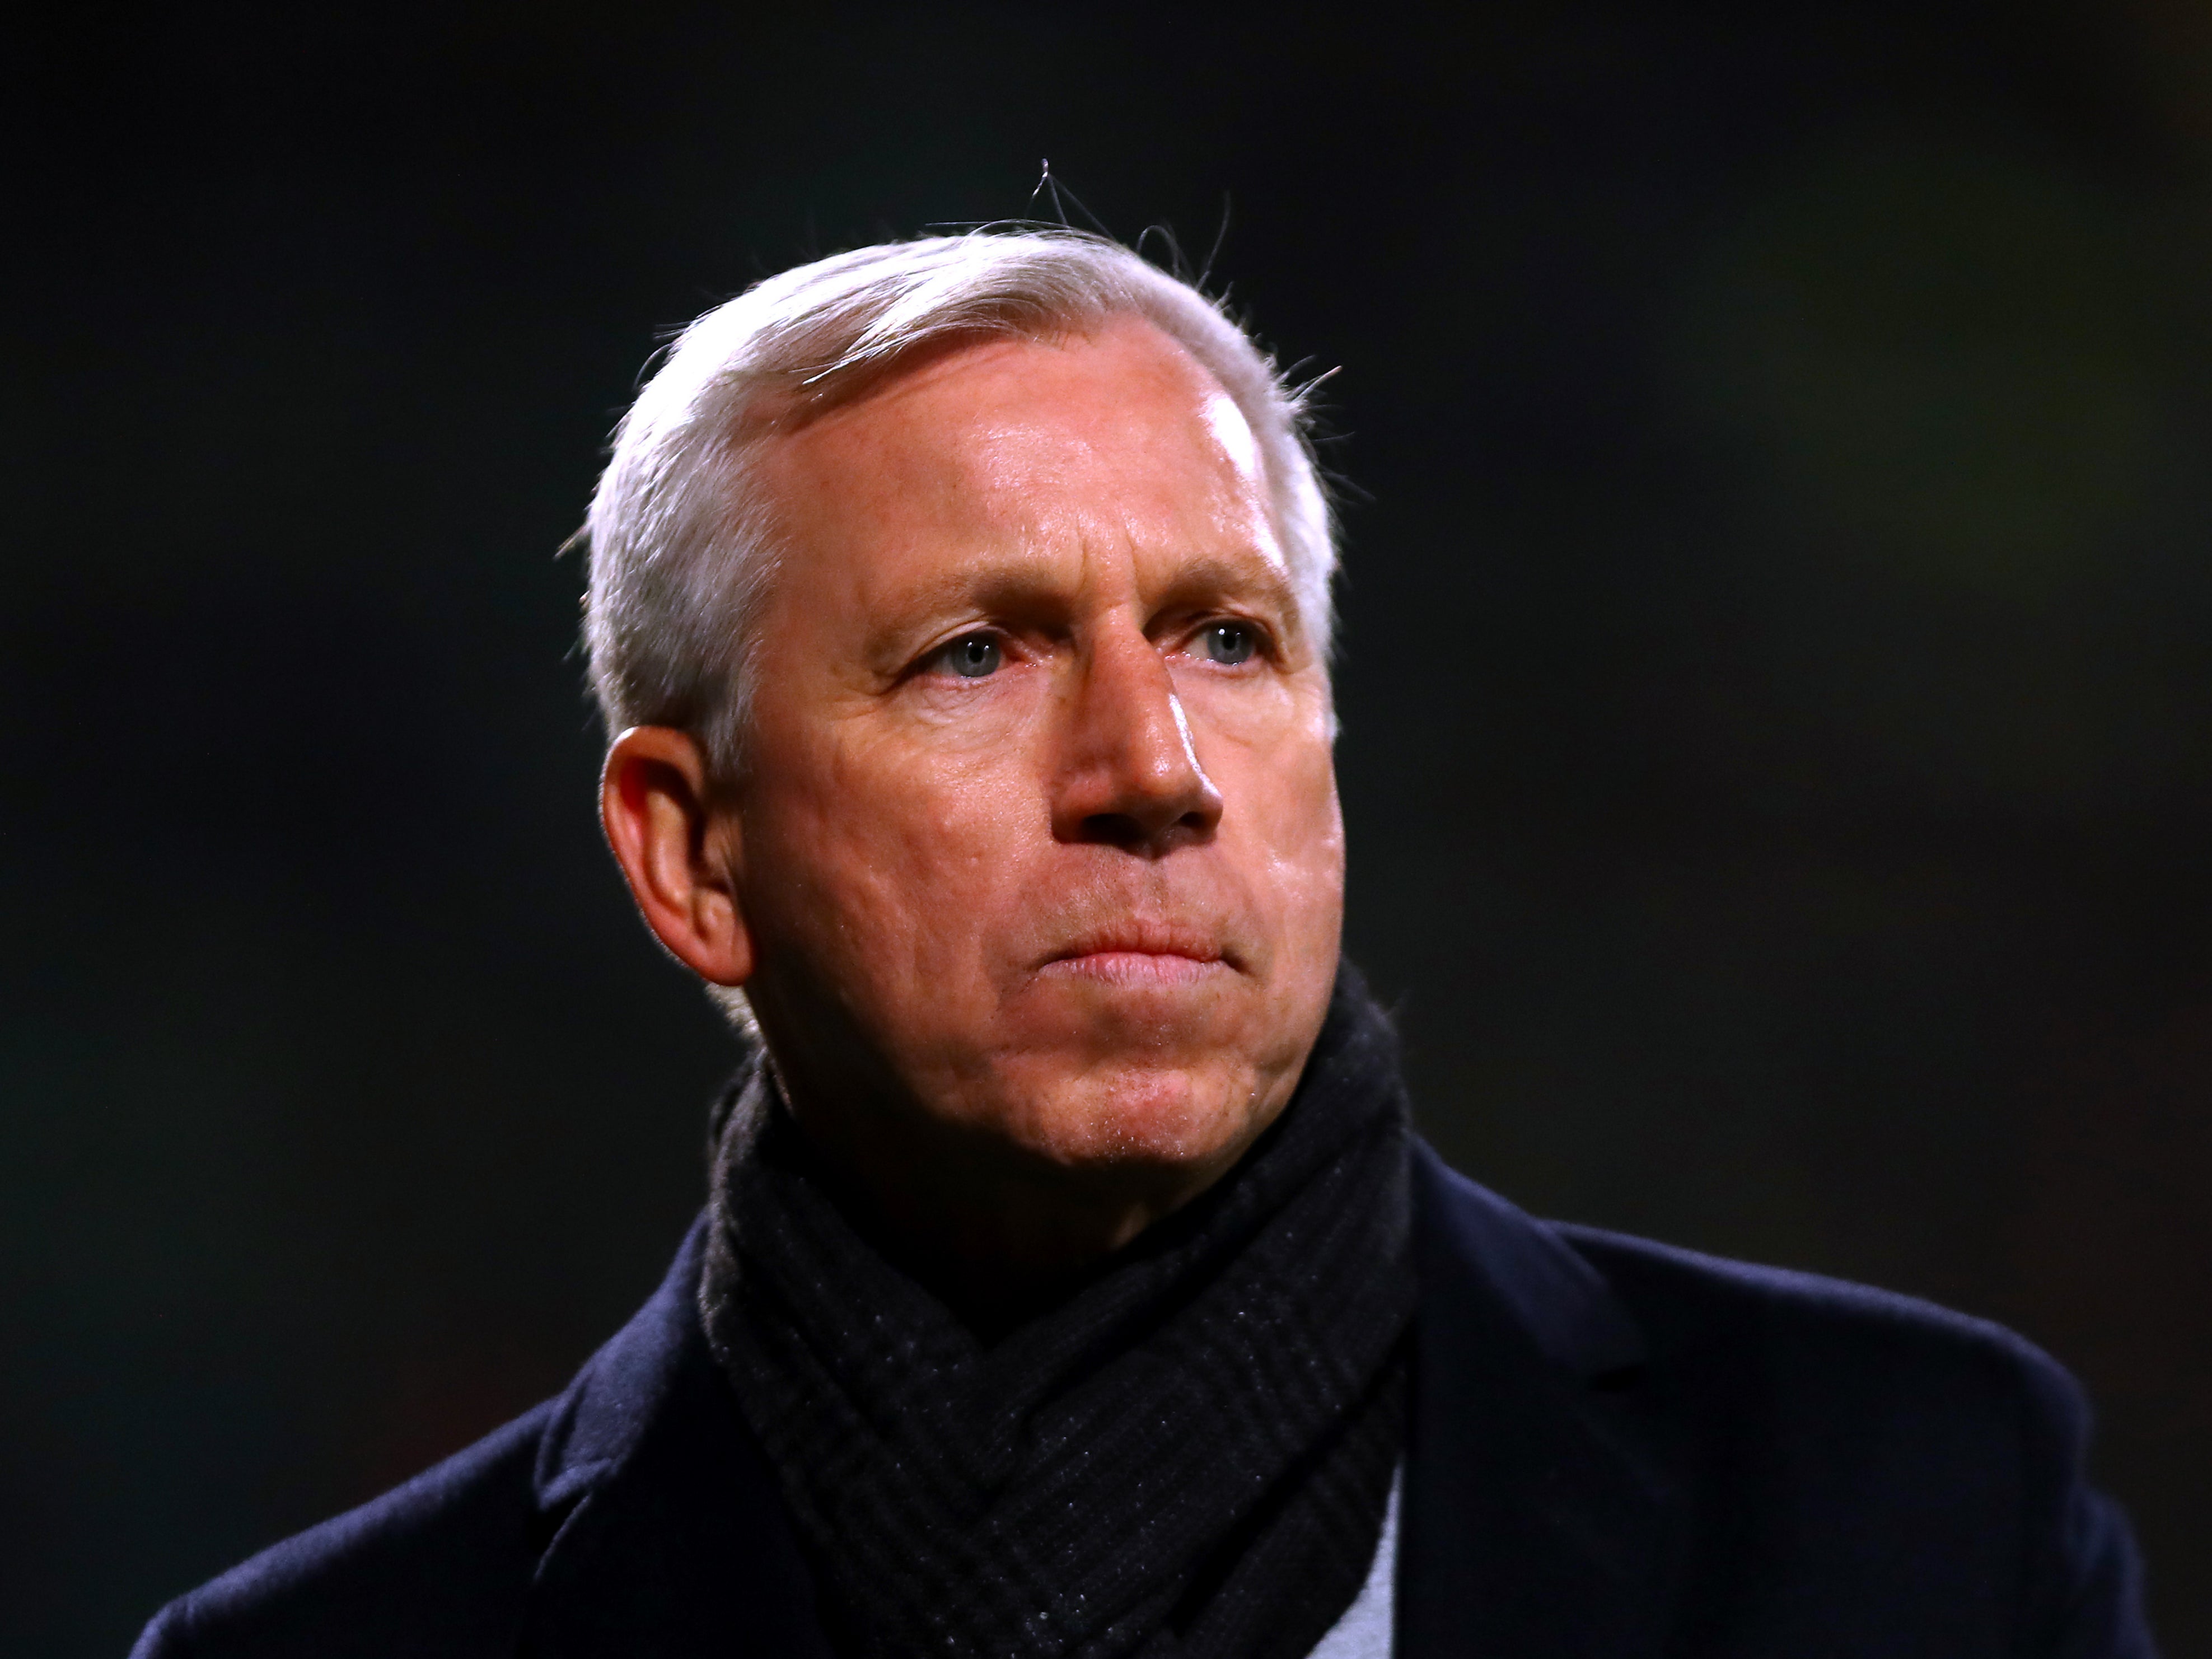 Alan Pardew took over as manager of CSKA Sofia in April